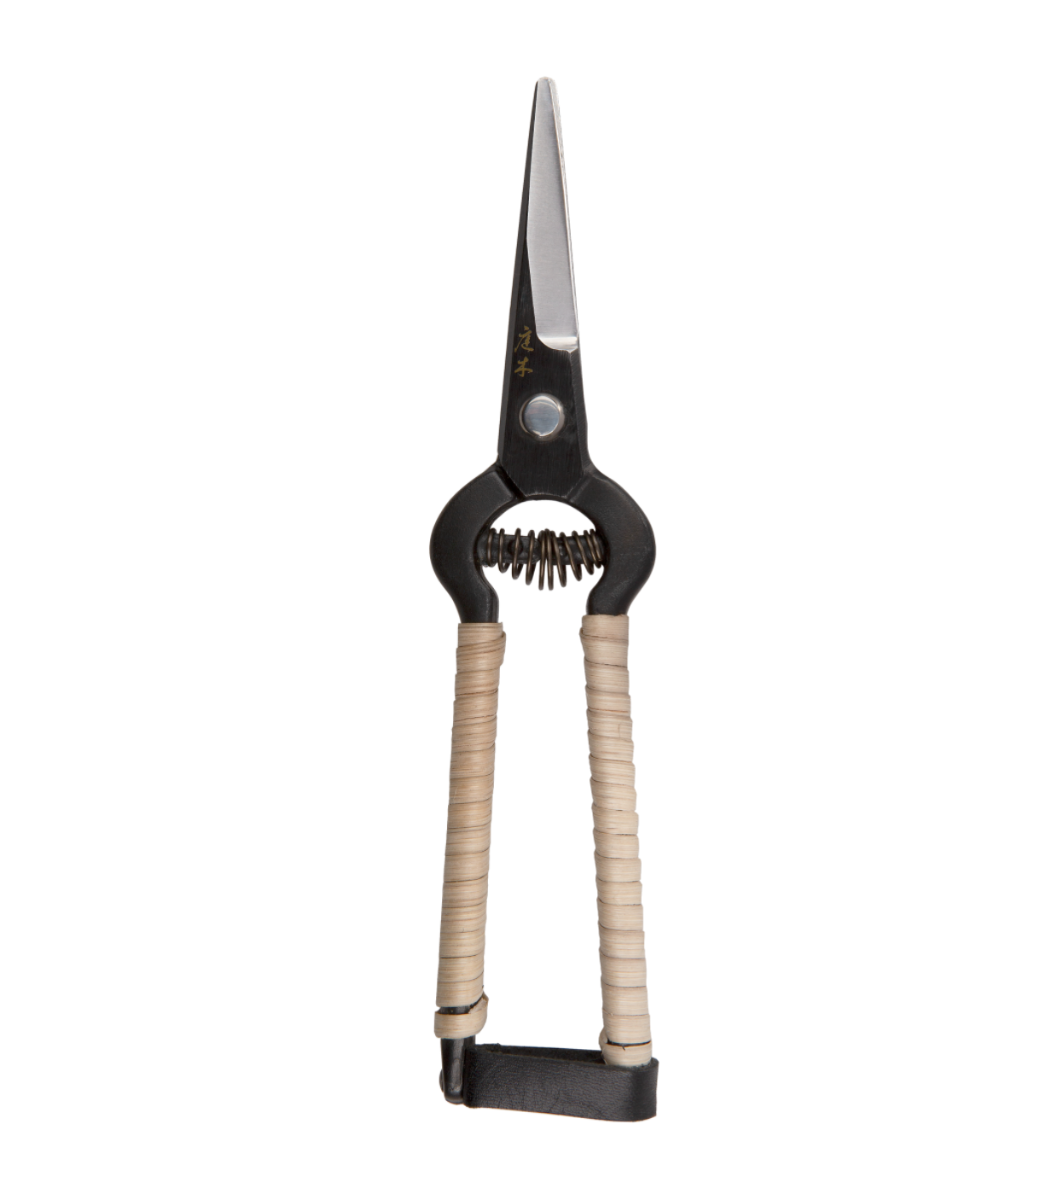 Japanese-made secateurs, perfect for garden pruning, house plants and flowers. Lovely refined action, wisteria rattan handles with a soft spring and an easy leather catch. 